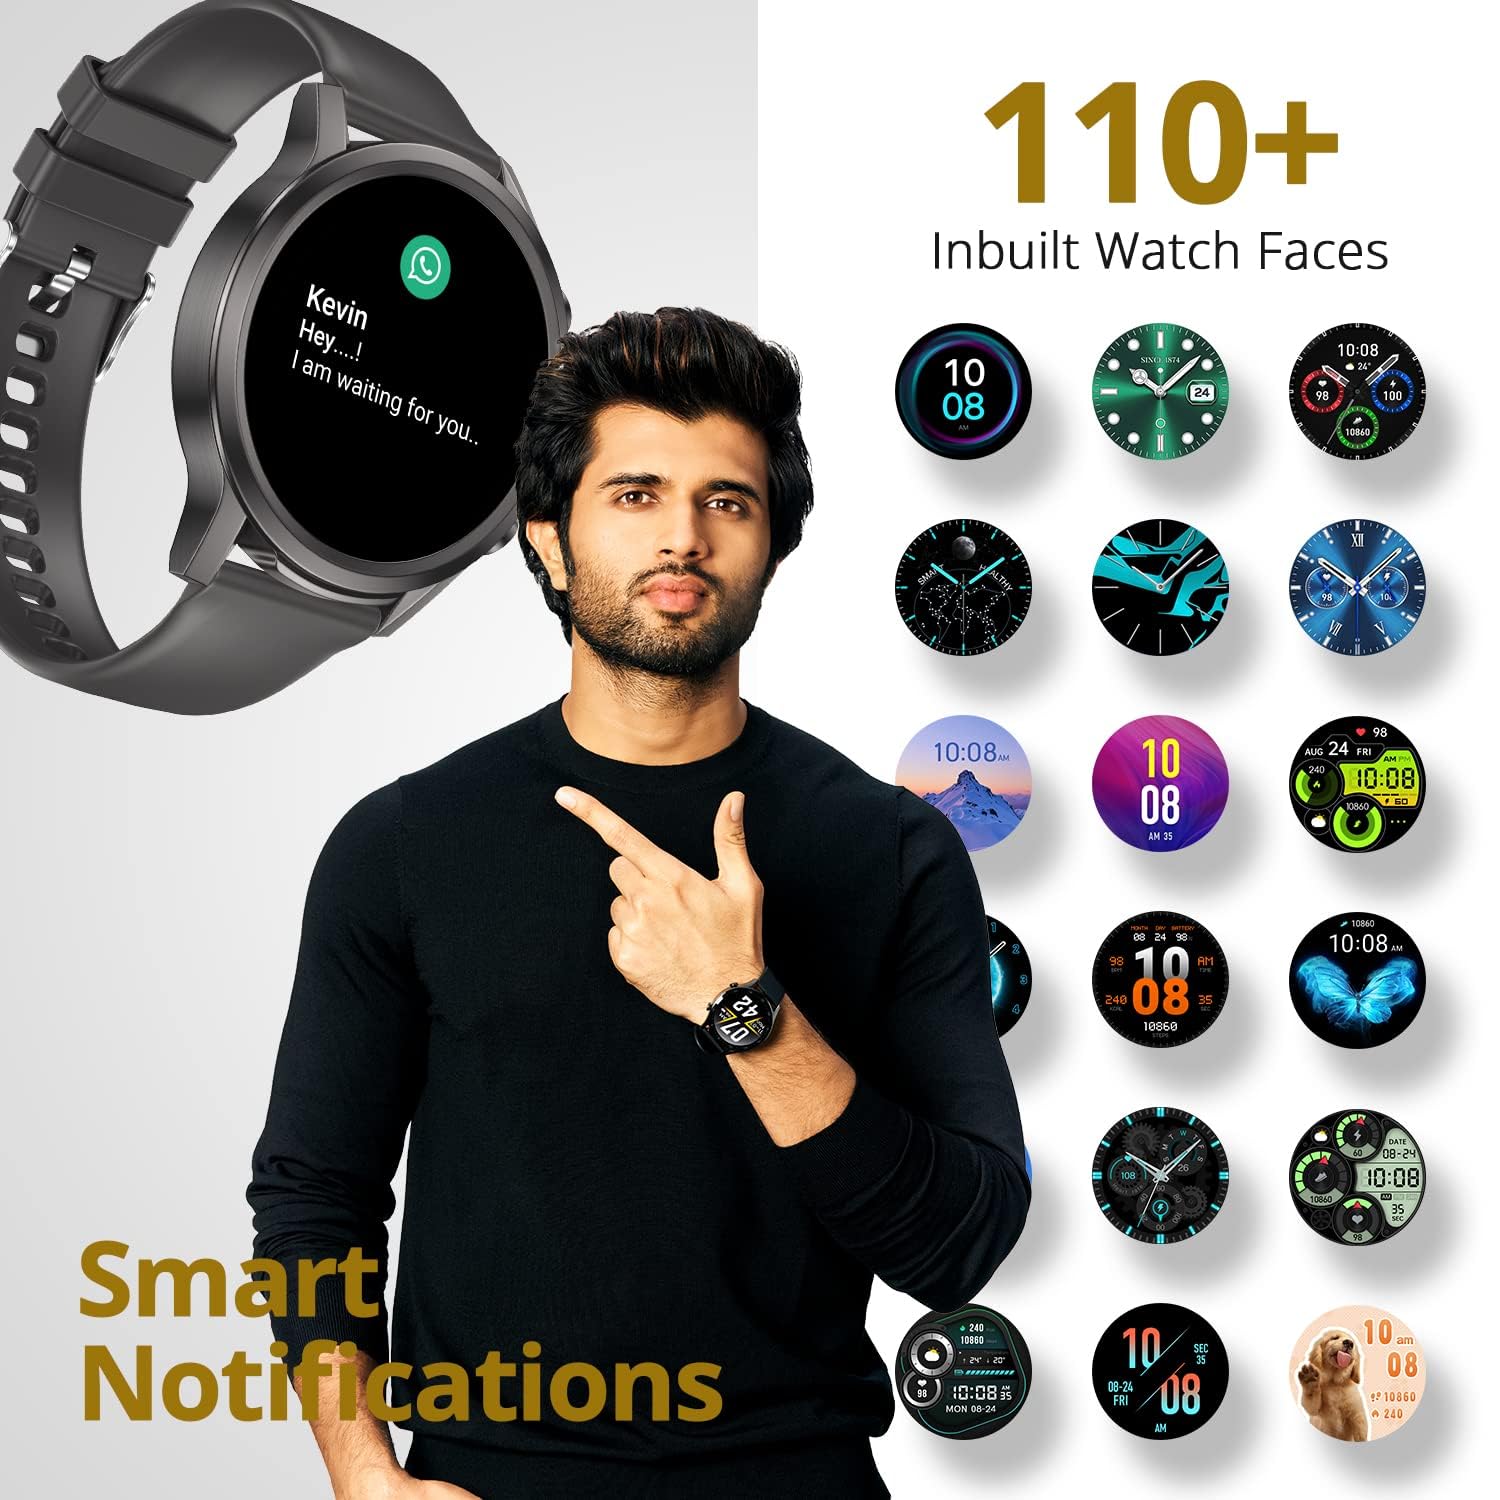 Fire-Boltt Infinity 1.6" Round Display Smart Watch, 400*400 Pixel High Resolution, Bluetooth Calling with Voice Assistance, 300 Plus Sports Modes & Internal Storage of 4GB to Store 300+ Songs, Rose Gold